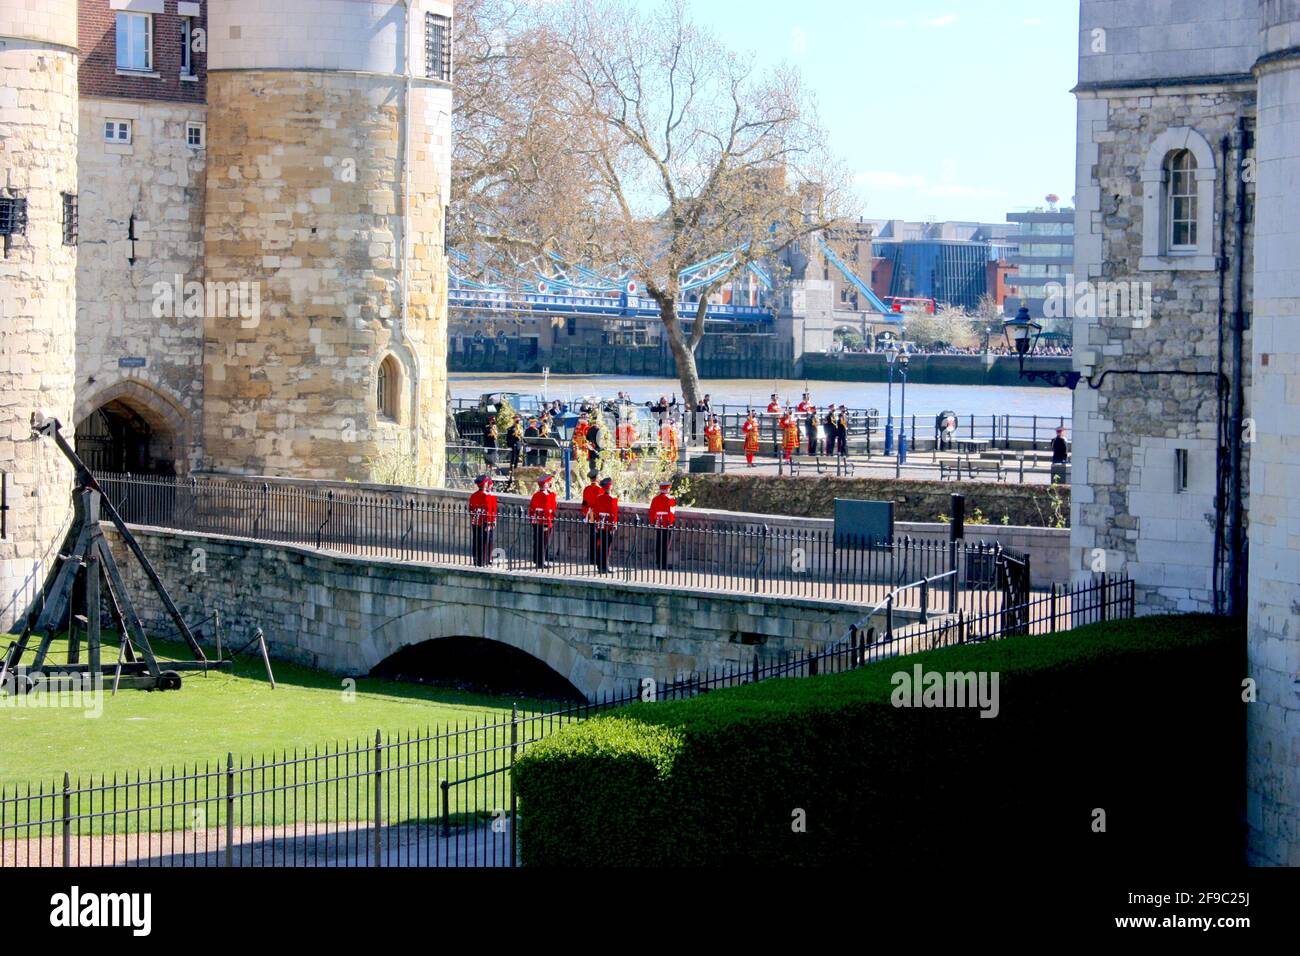 The Beefeaters am Tower of London Stockfoto